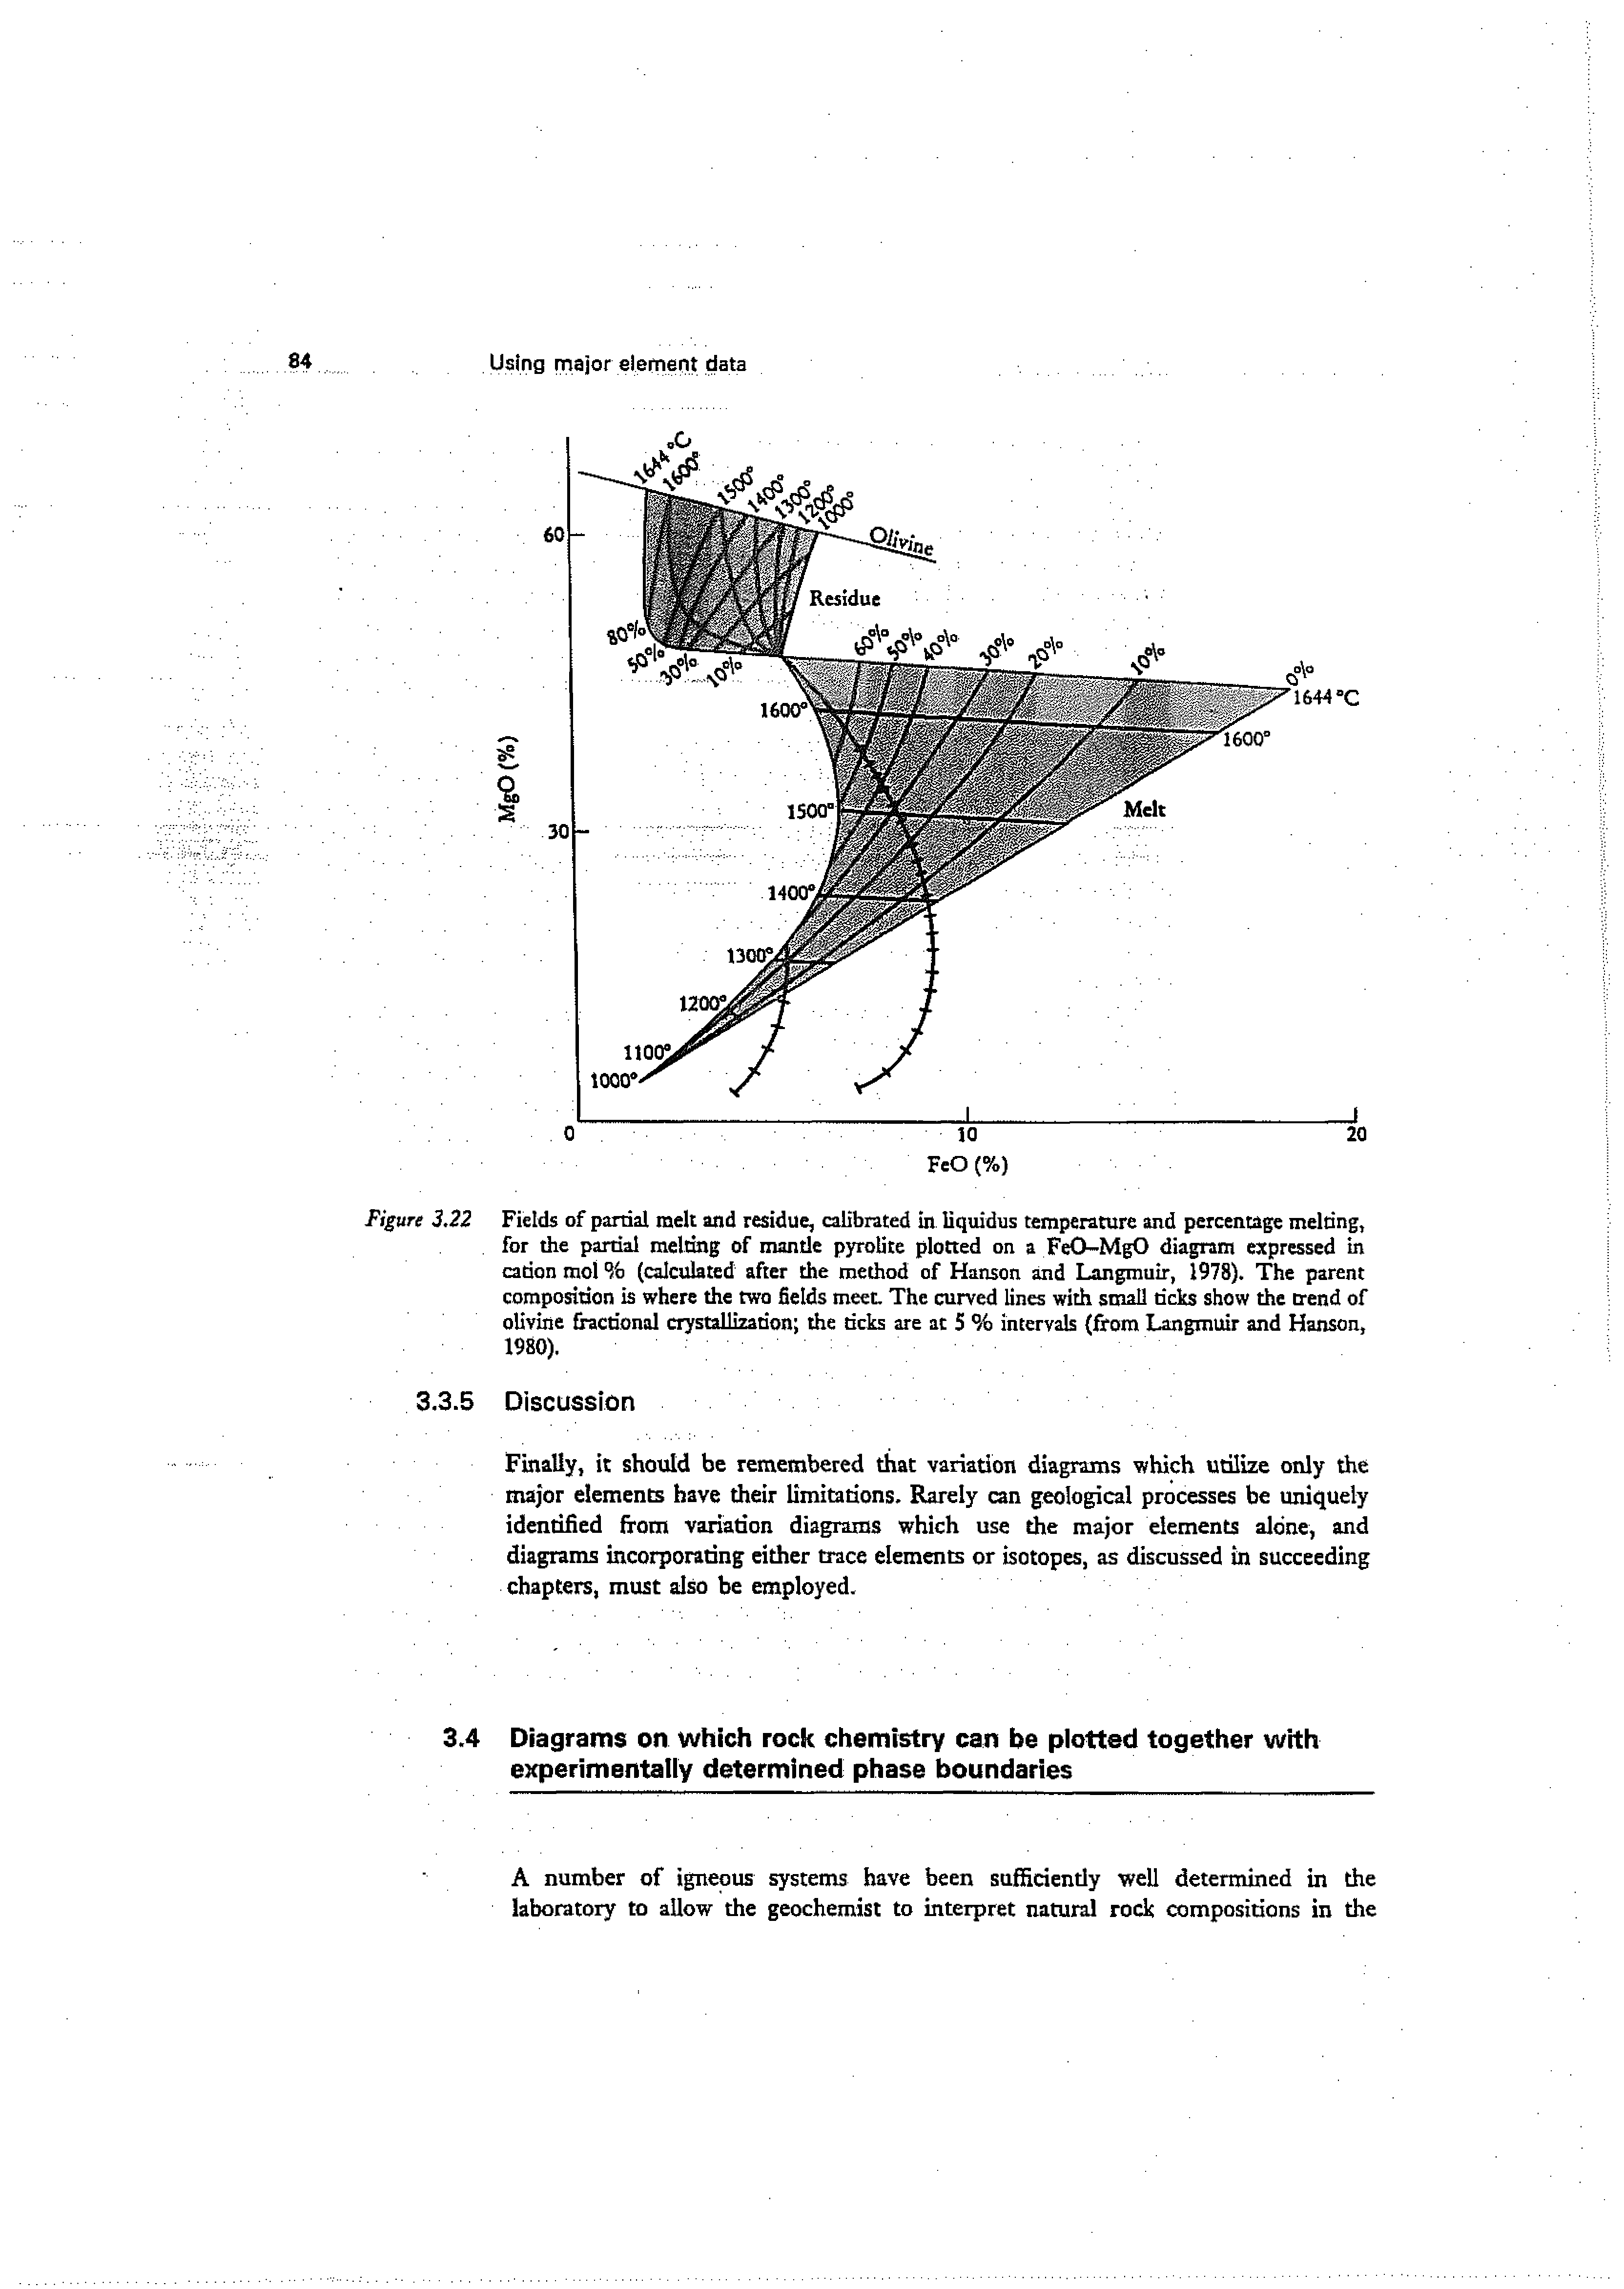 Figure 3.22 Fields of partial melt and residue, calibrated in liquidus temperature and percentage meldng, for the pardat meldng of mande pyrolite plotted on a FeO-MgO diagram expressed in cadon mol Sb (calculated after the method of Hanson and Langmuir, 1978). The parent composition is where the two fields meet The curved lines with small tides show the trend of olivine fractional crystallization the ticks are at 5 % intervals (from Langmuir and Hanson, 1980).